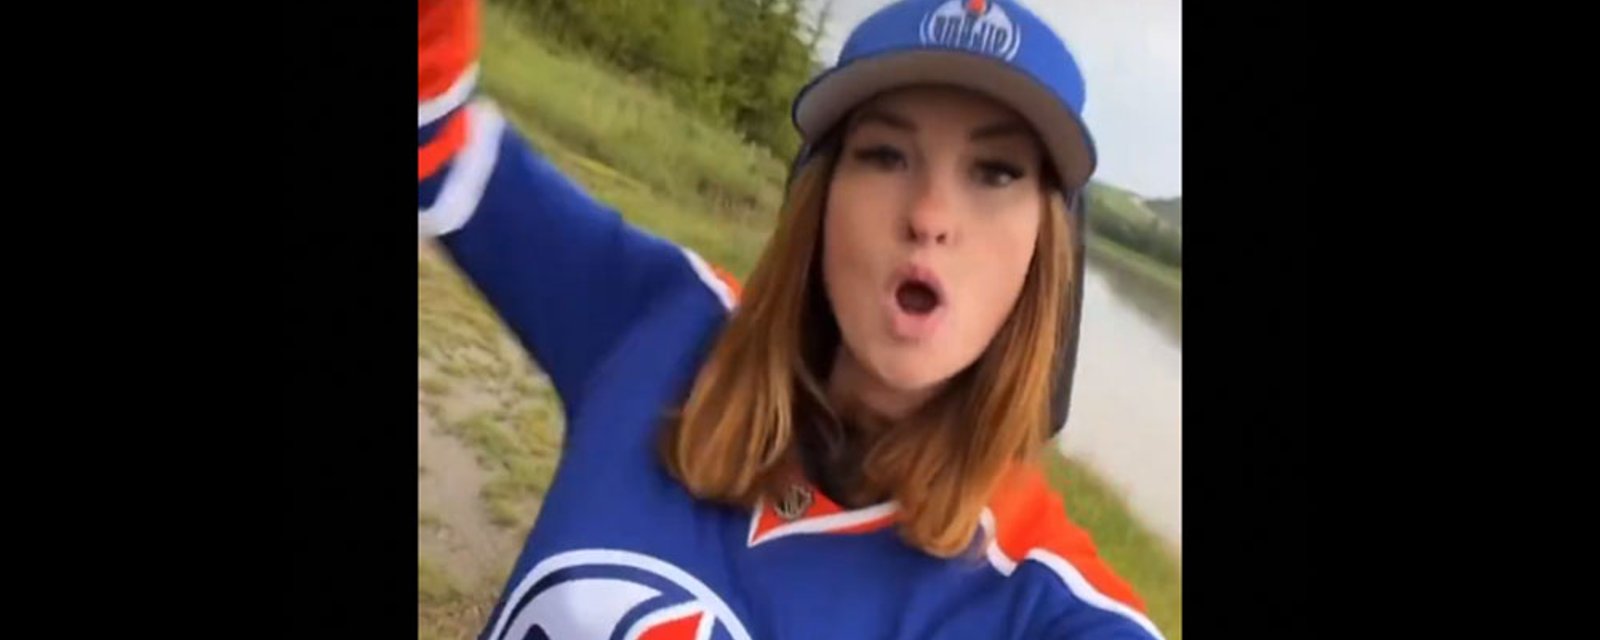 “Oilers Girl” goes viral with a new video posted on social media ...